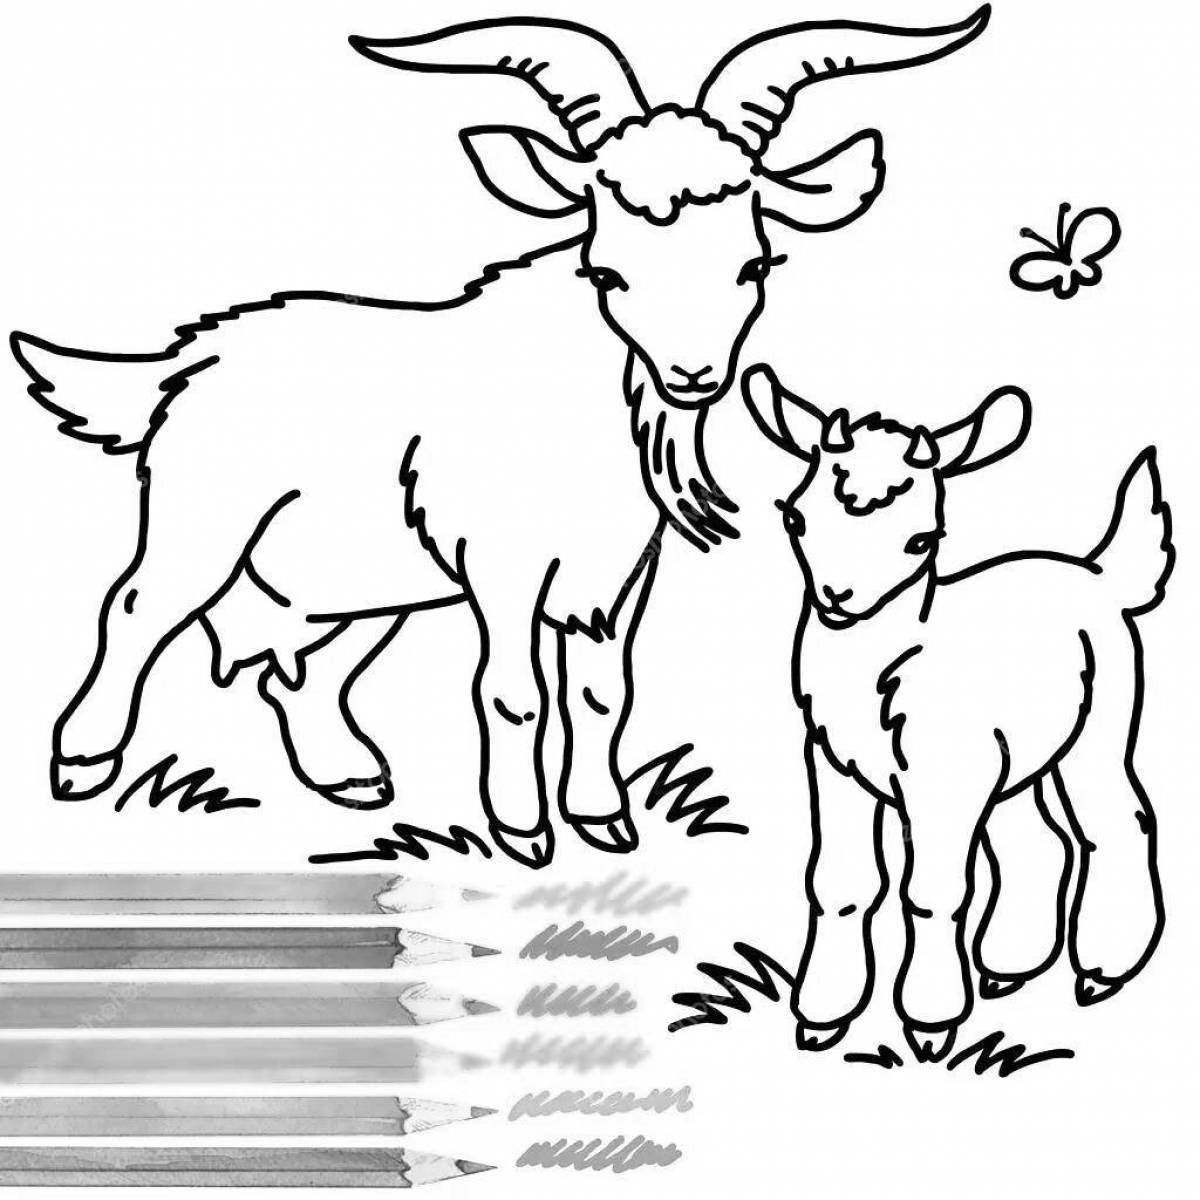 Adorable goat coloring page for 5-6 year olds